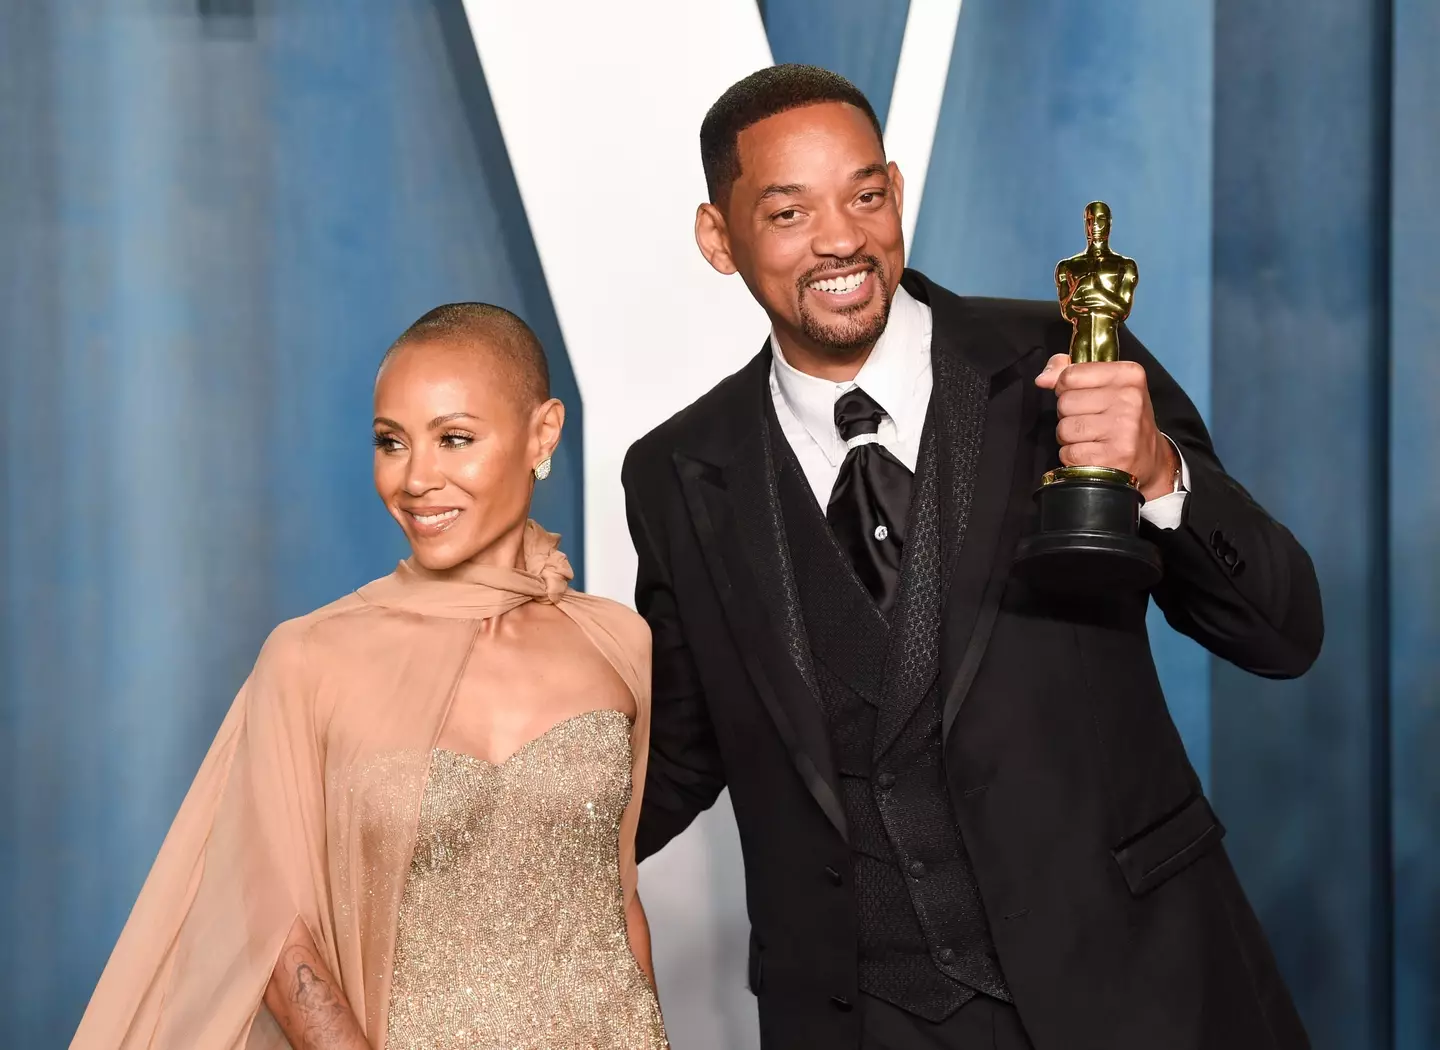 Will Smith won an Oscar for Best Actor shortly after the altercation with Chris Rock on stage.